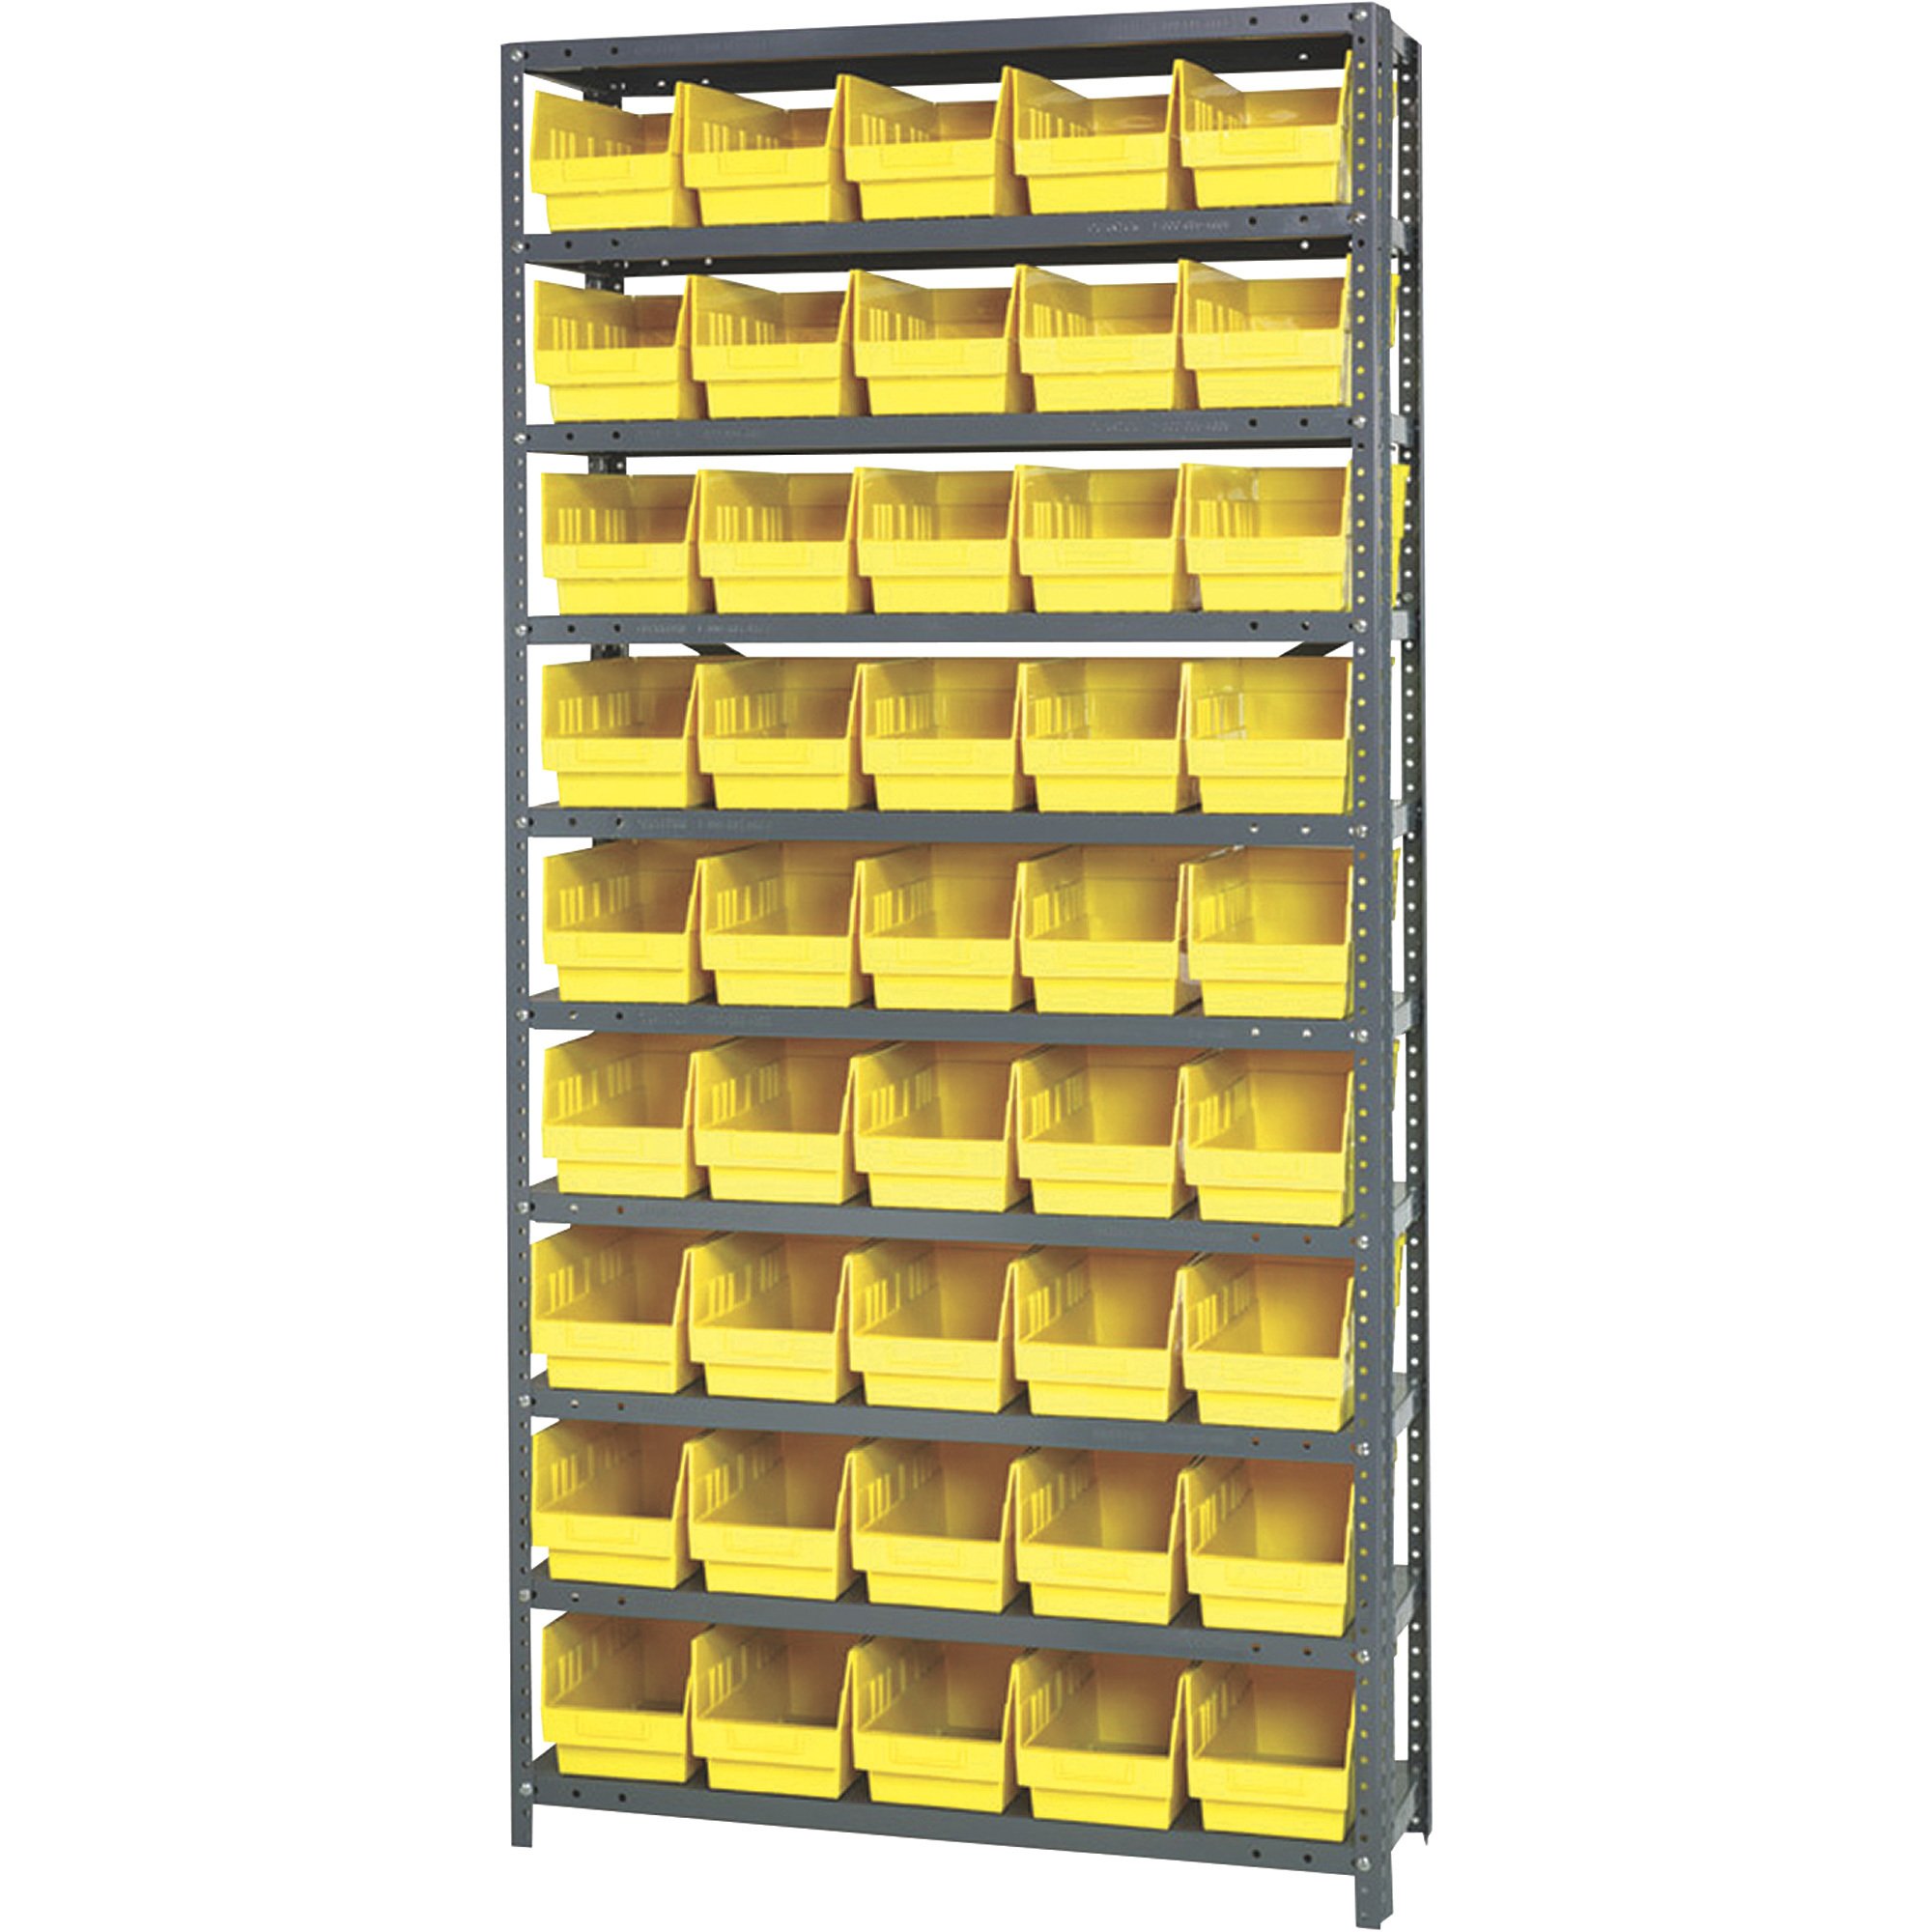 Strongway 12 Tier Single Sided 66 Bin Wire Shelving Rack 39 12inw X 16ind X 80 12inh 4873